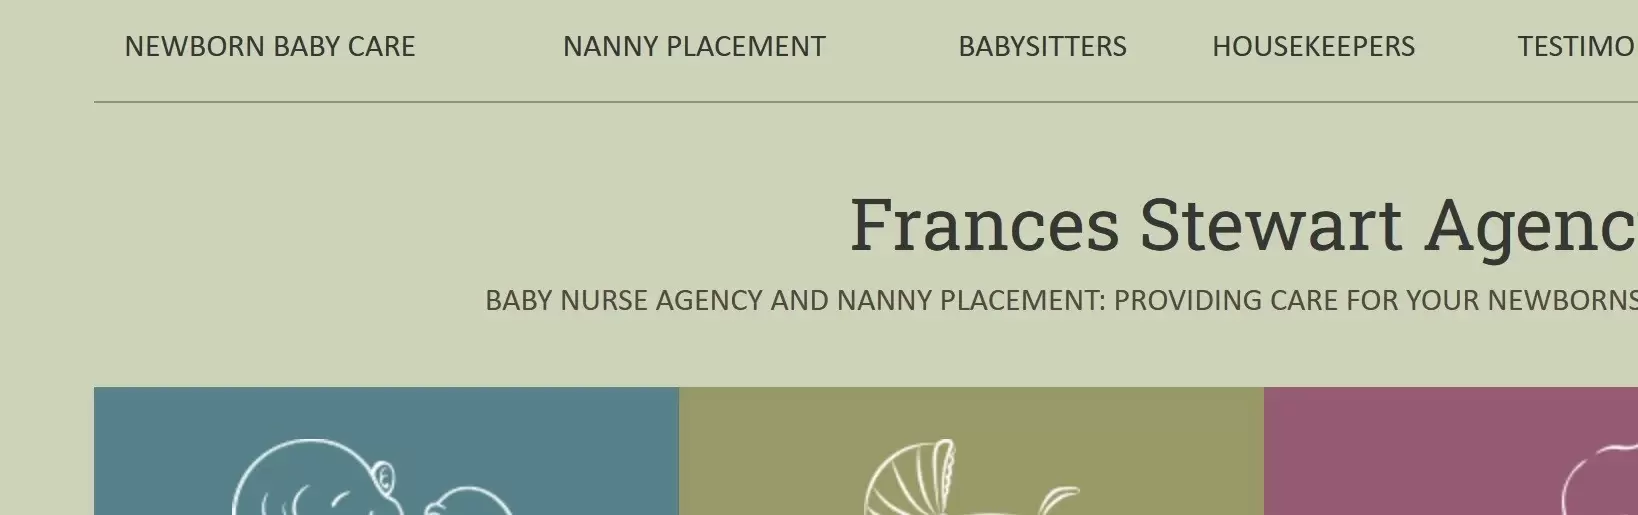 Frances Stewart Agency company profile and reviews